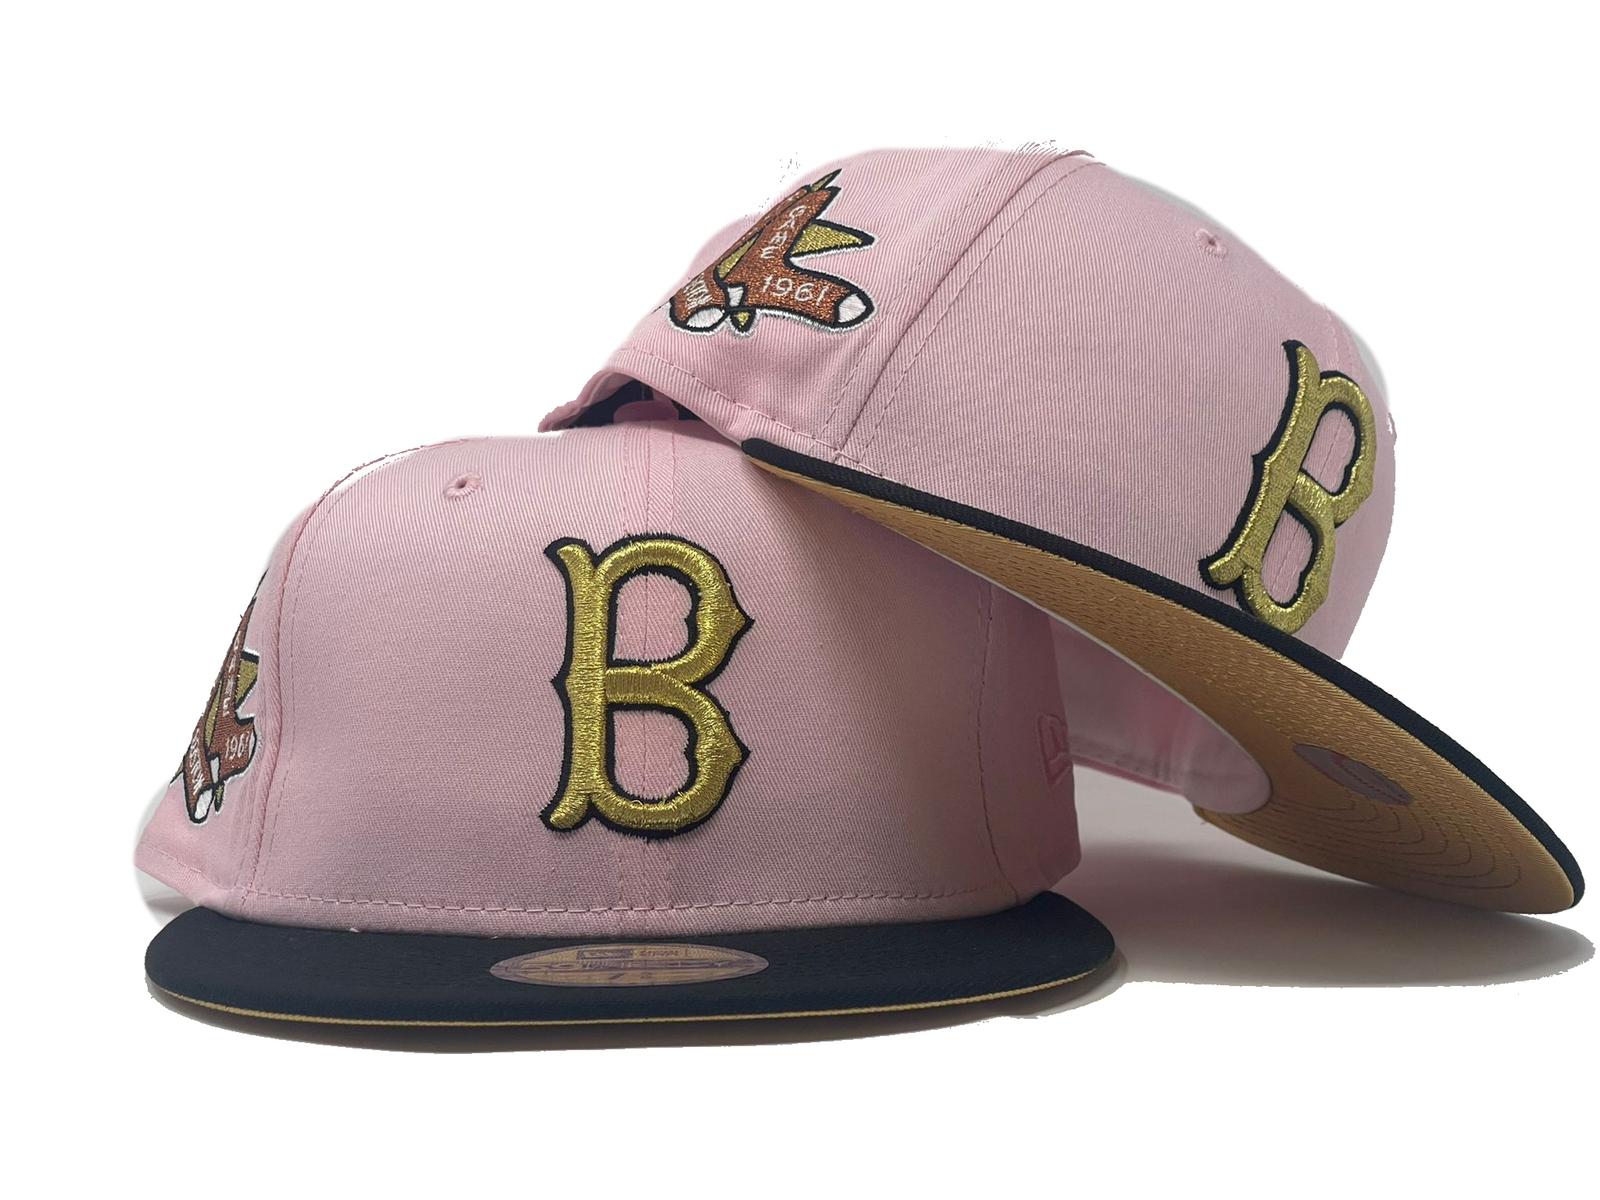 NEW ERA 59FIFTY MLB BOSTON RED SOX ALL STAR GAME 1961 TWO TONE / VEGAS GOLD  UV FITTED CAP